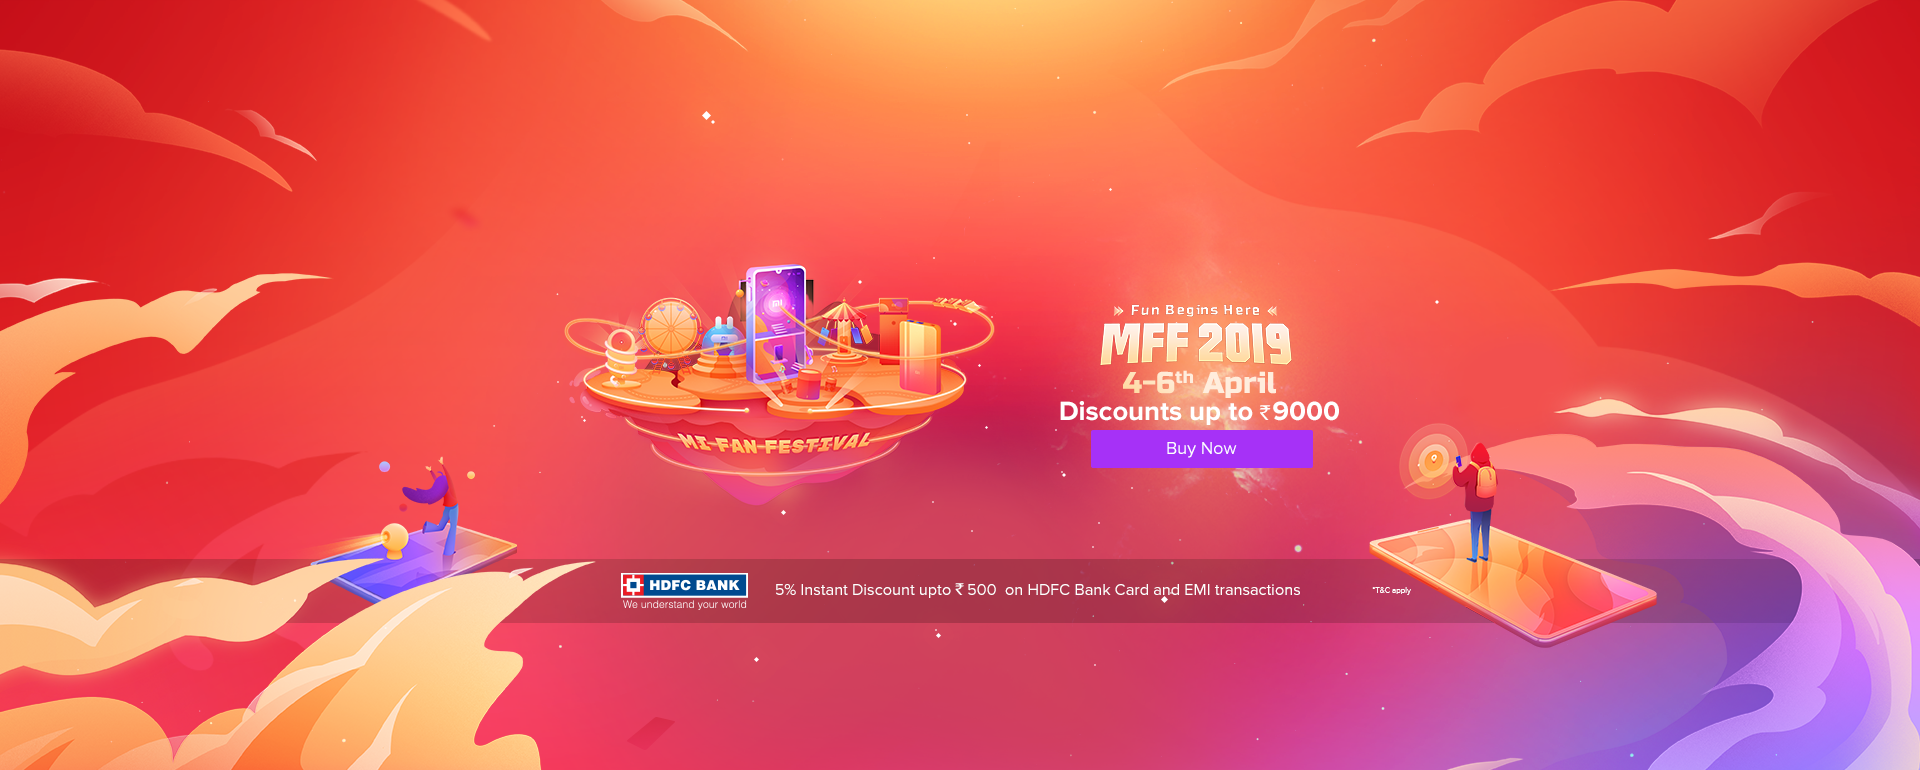 Mi Fan Festival 1 Rs Sale: Mi Picks, Rs.1 Flash Sale, Mystery Box & more + 5% Instant OFF upto Rs.500 on HDFC Bank Card at Mi.com